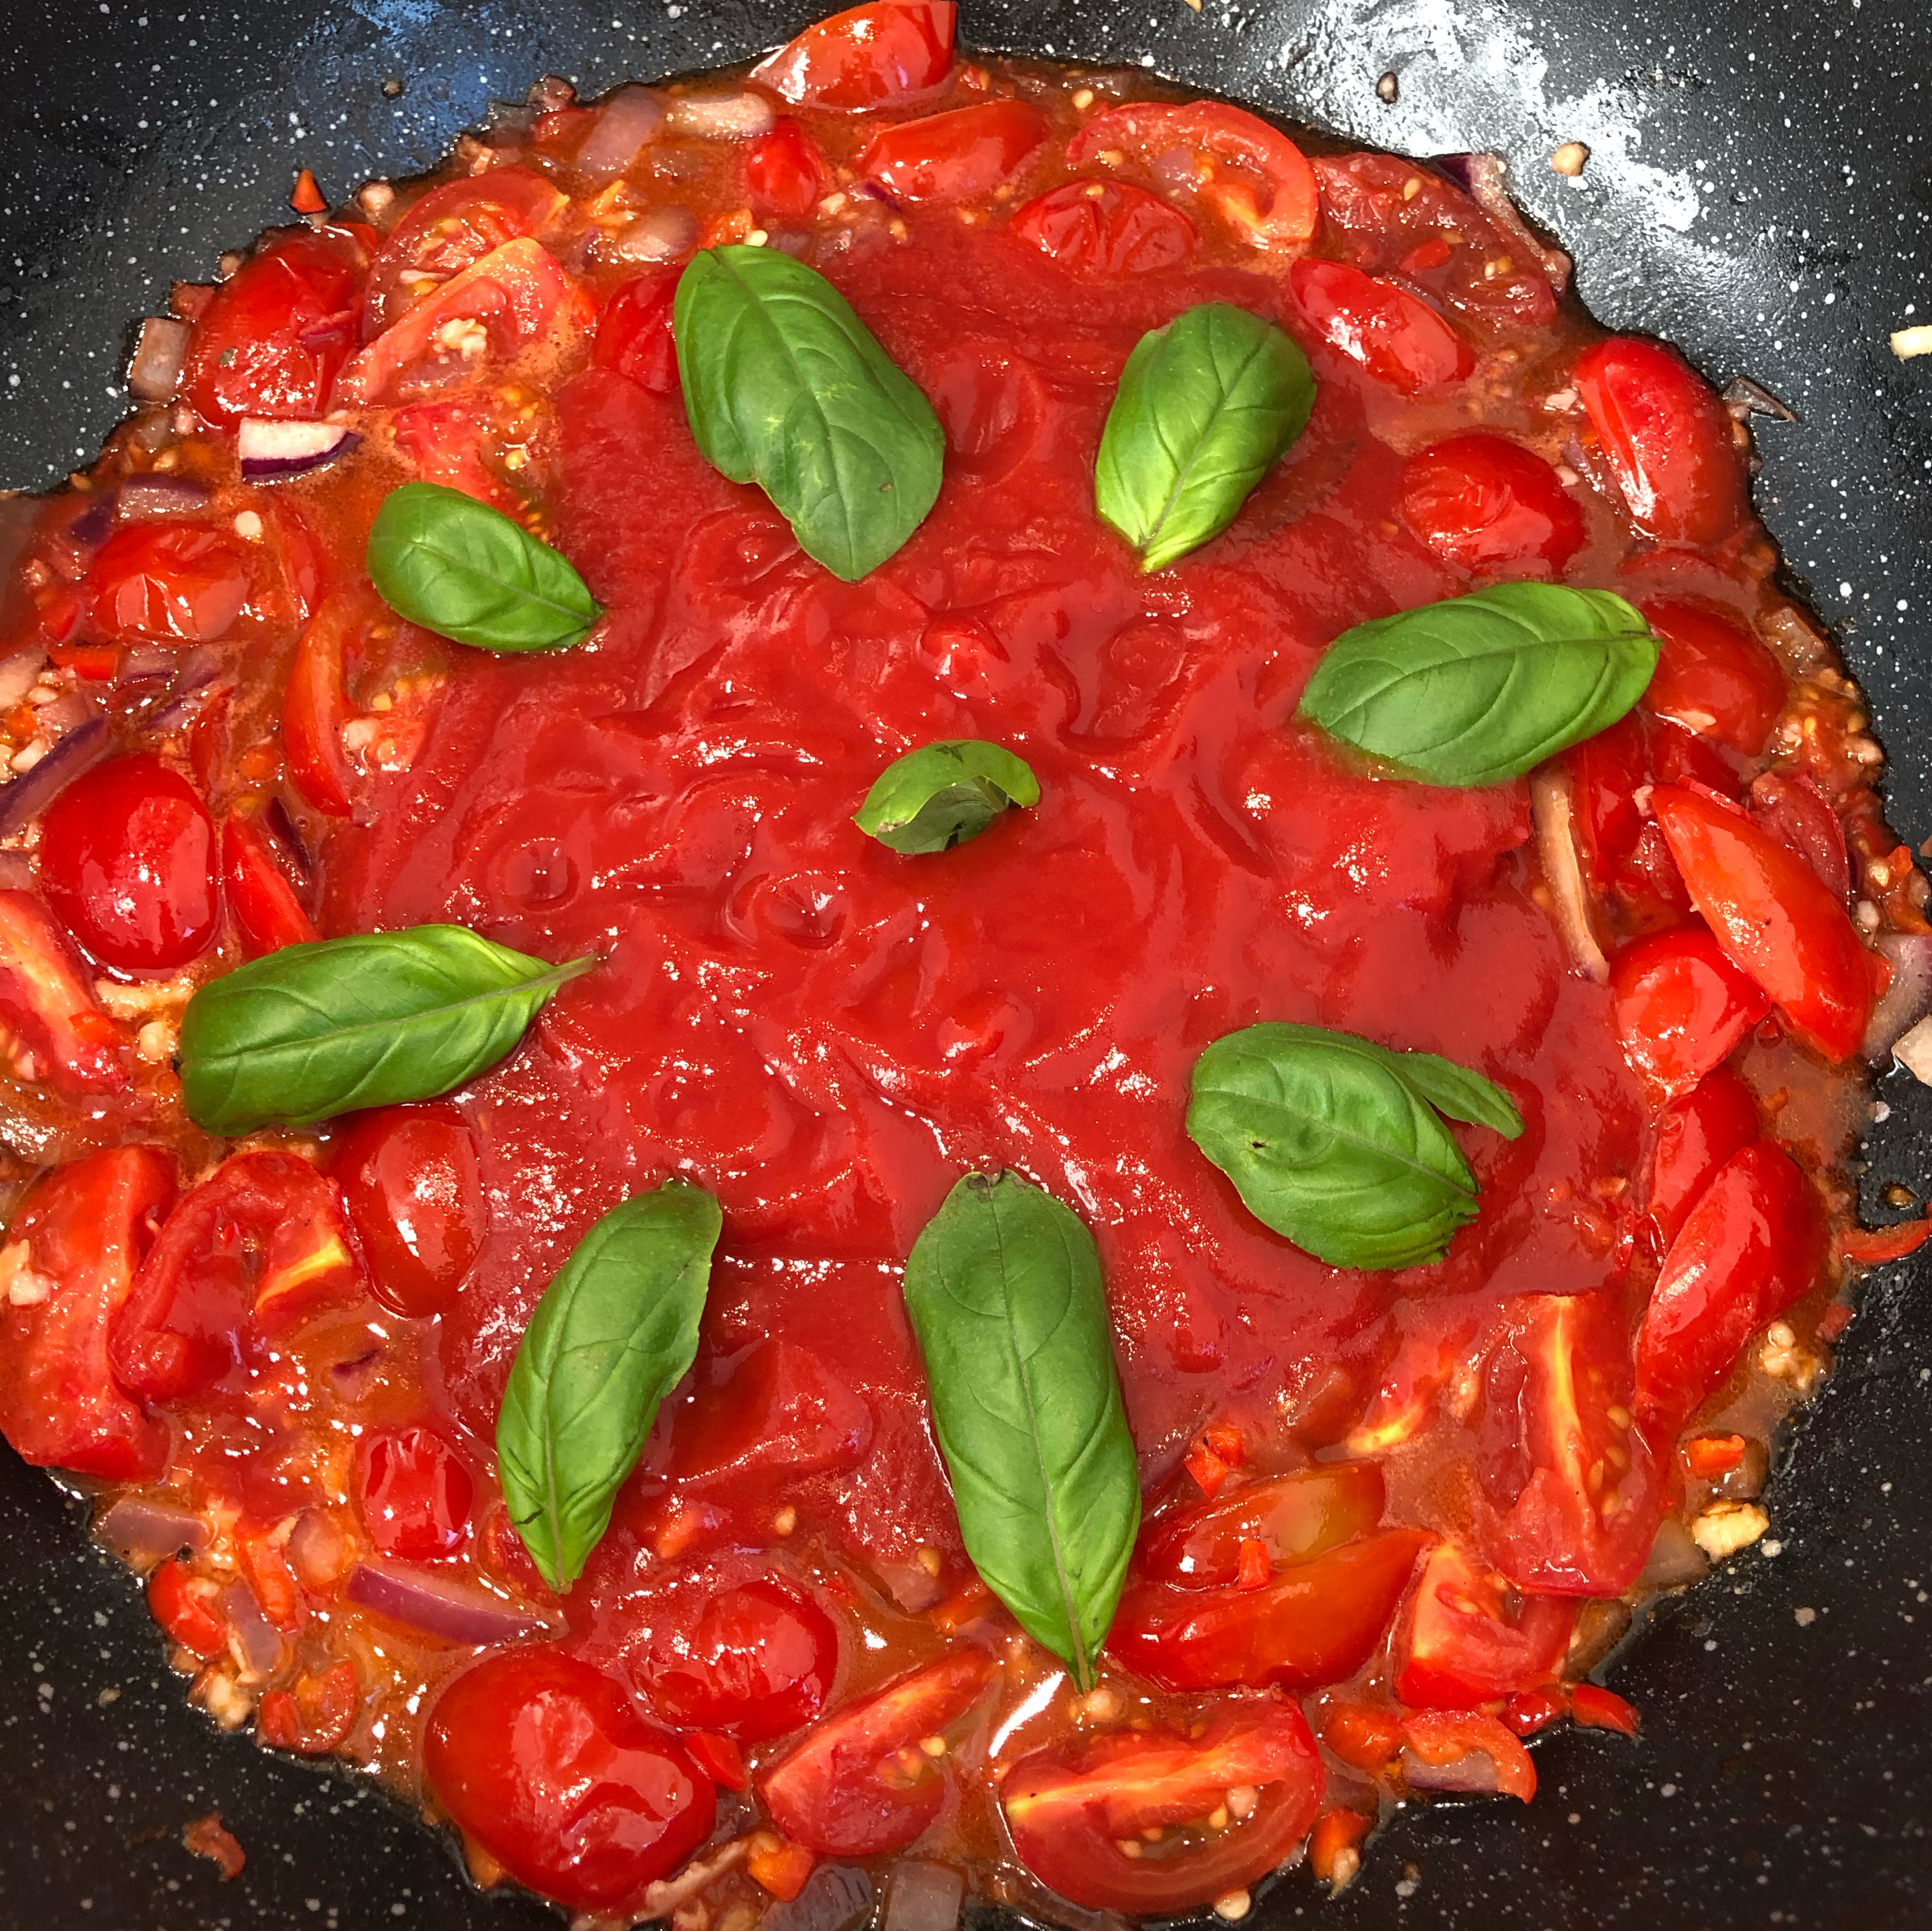 Add Passata and add basil. Stir through and cook for another 5 min on medium to high heat.